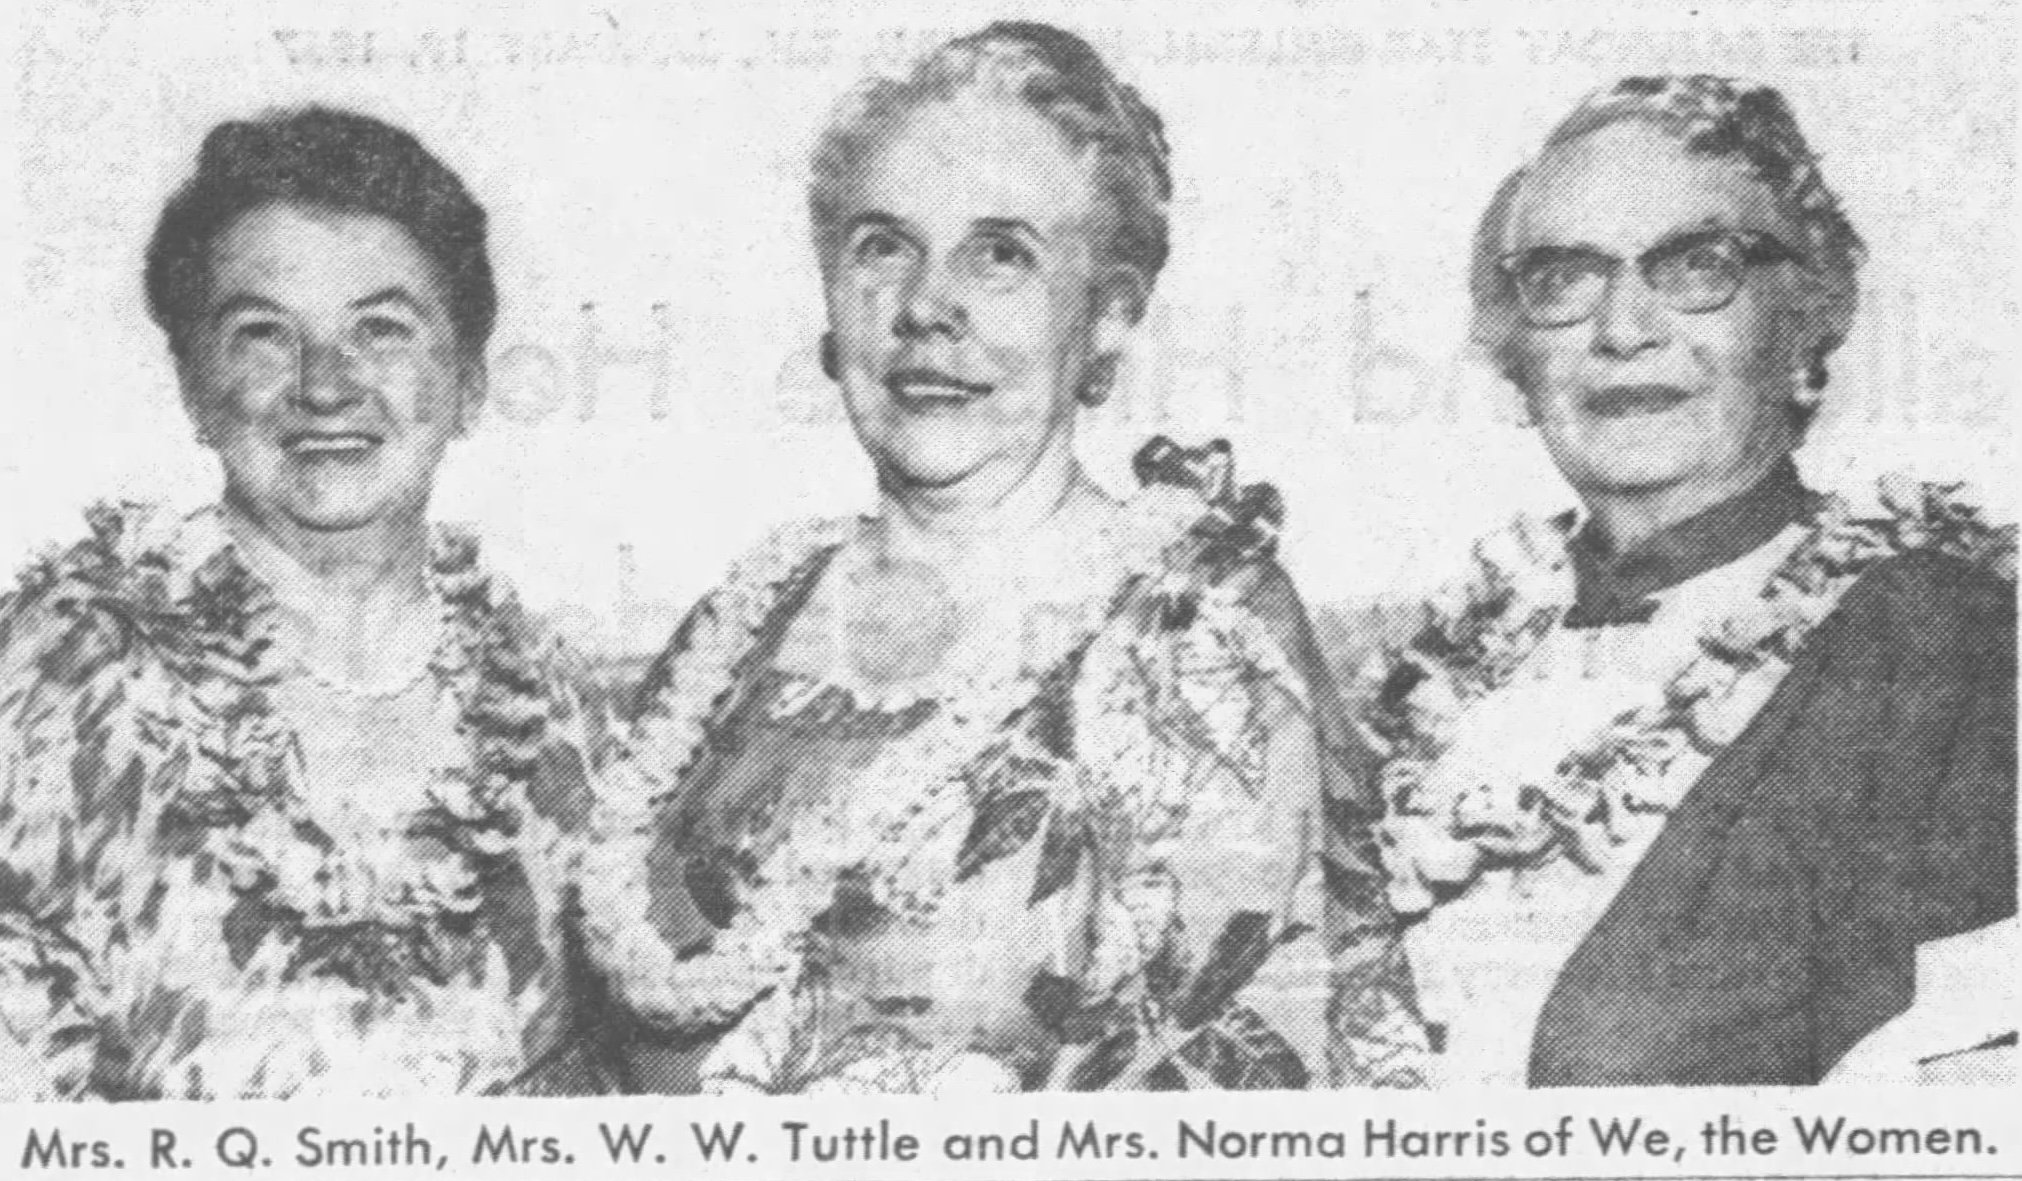  Published in the Honolulu Star-Bulletin, 1/19/1957 